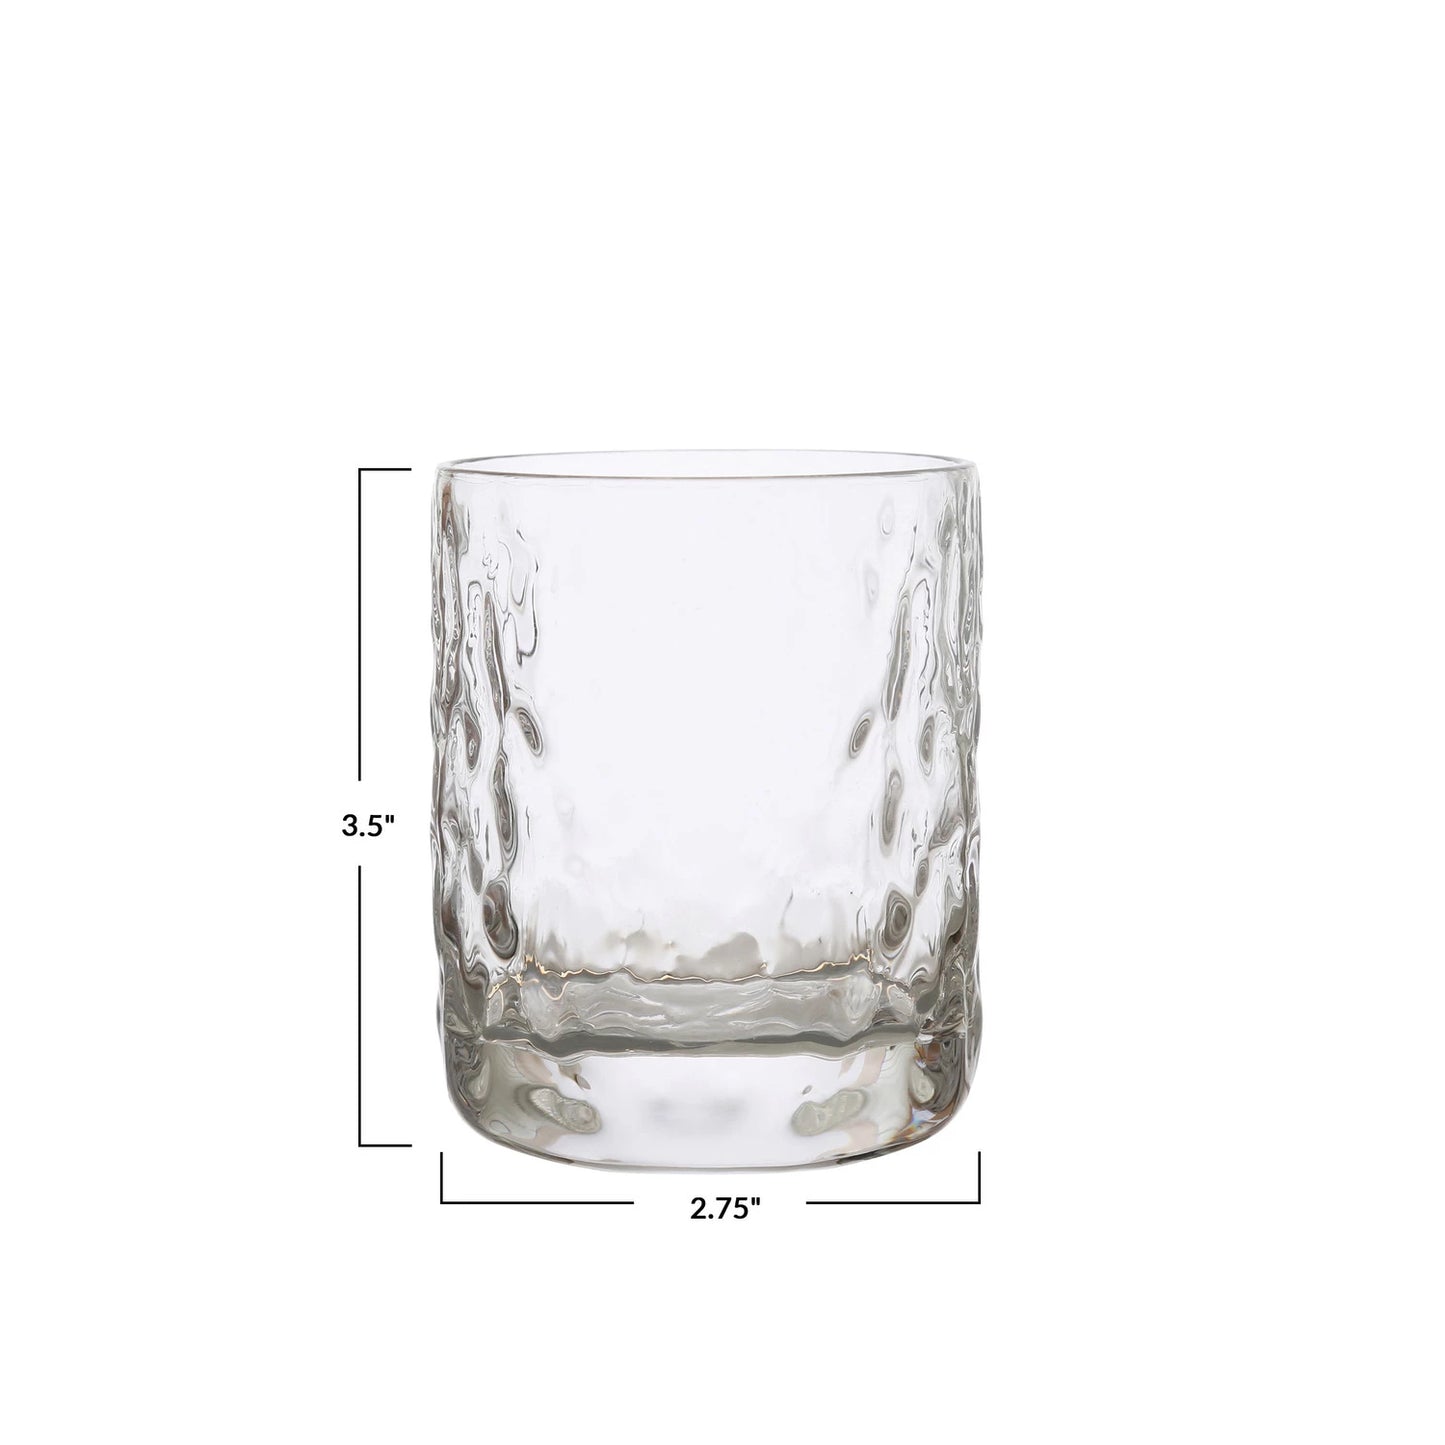 Hammered Drinking Glass, The Feathered Farmhouse